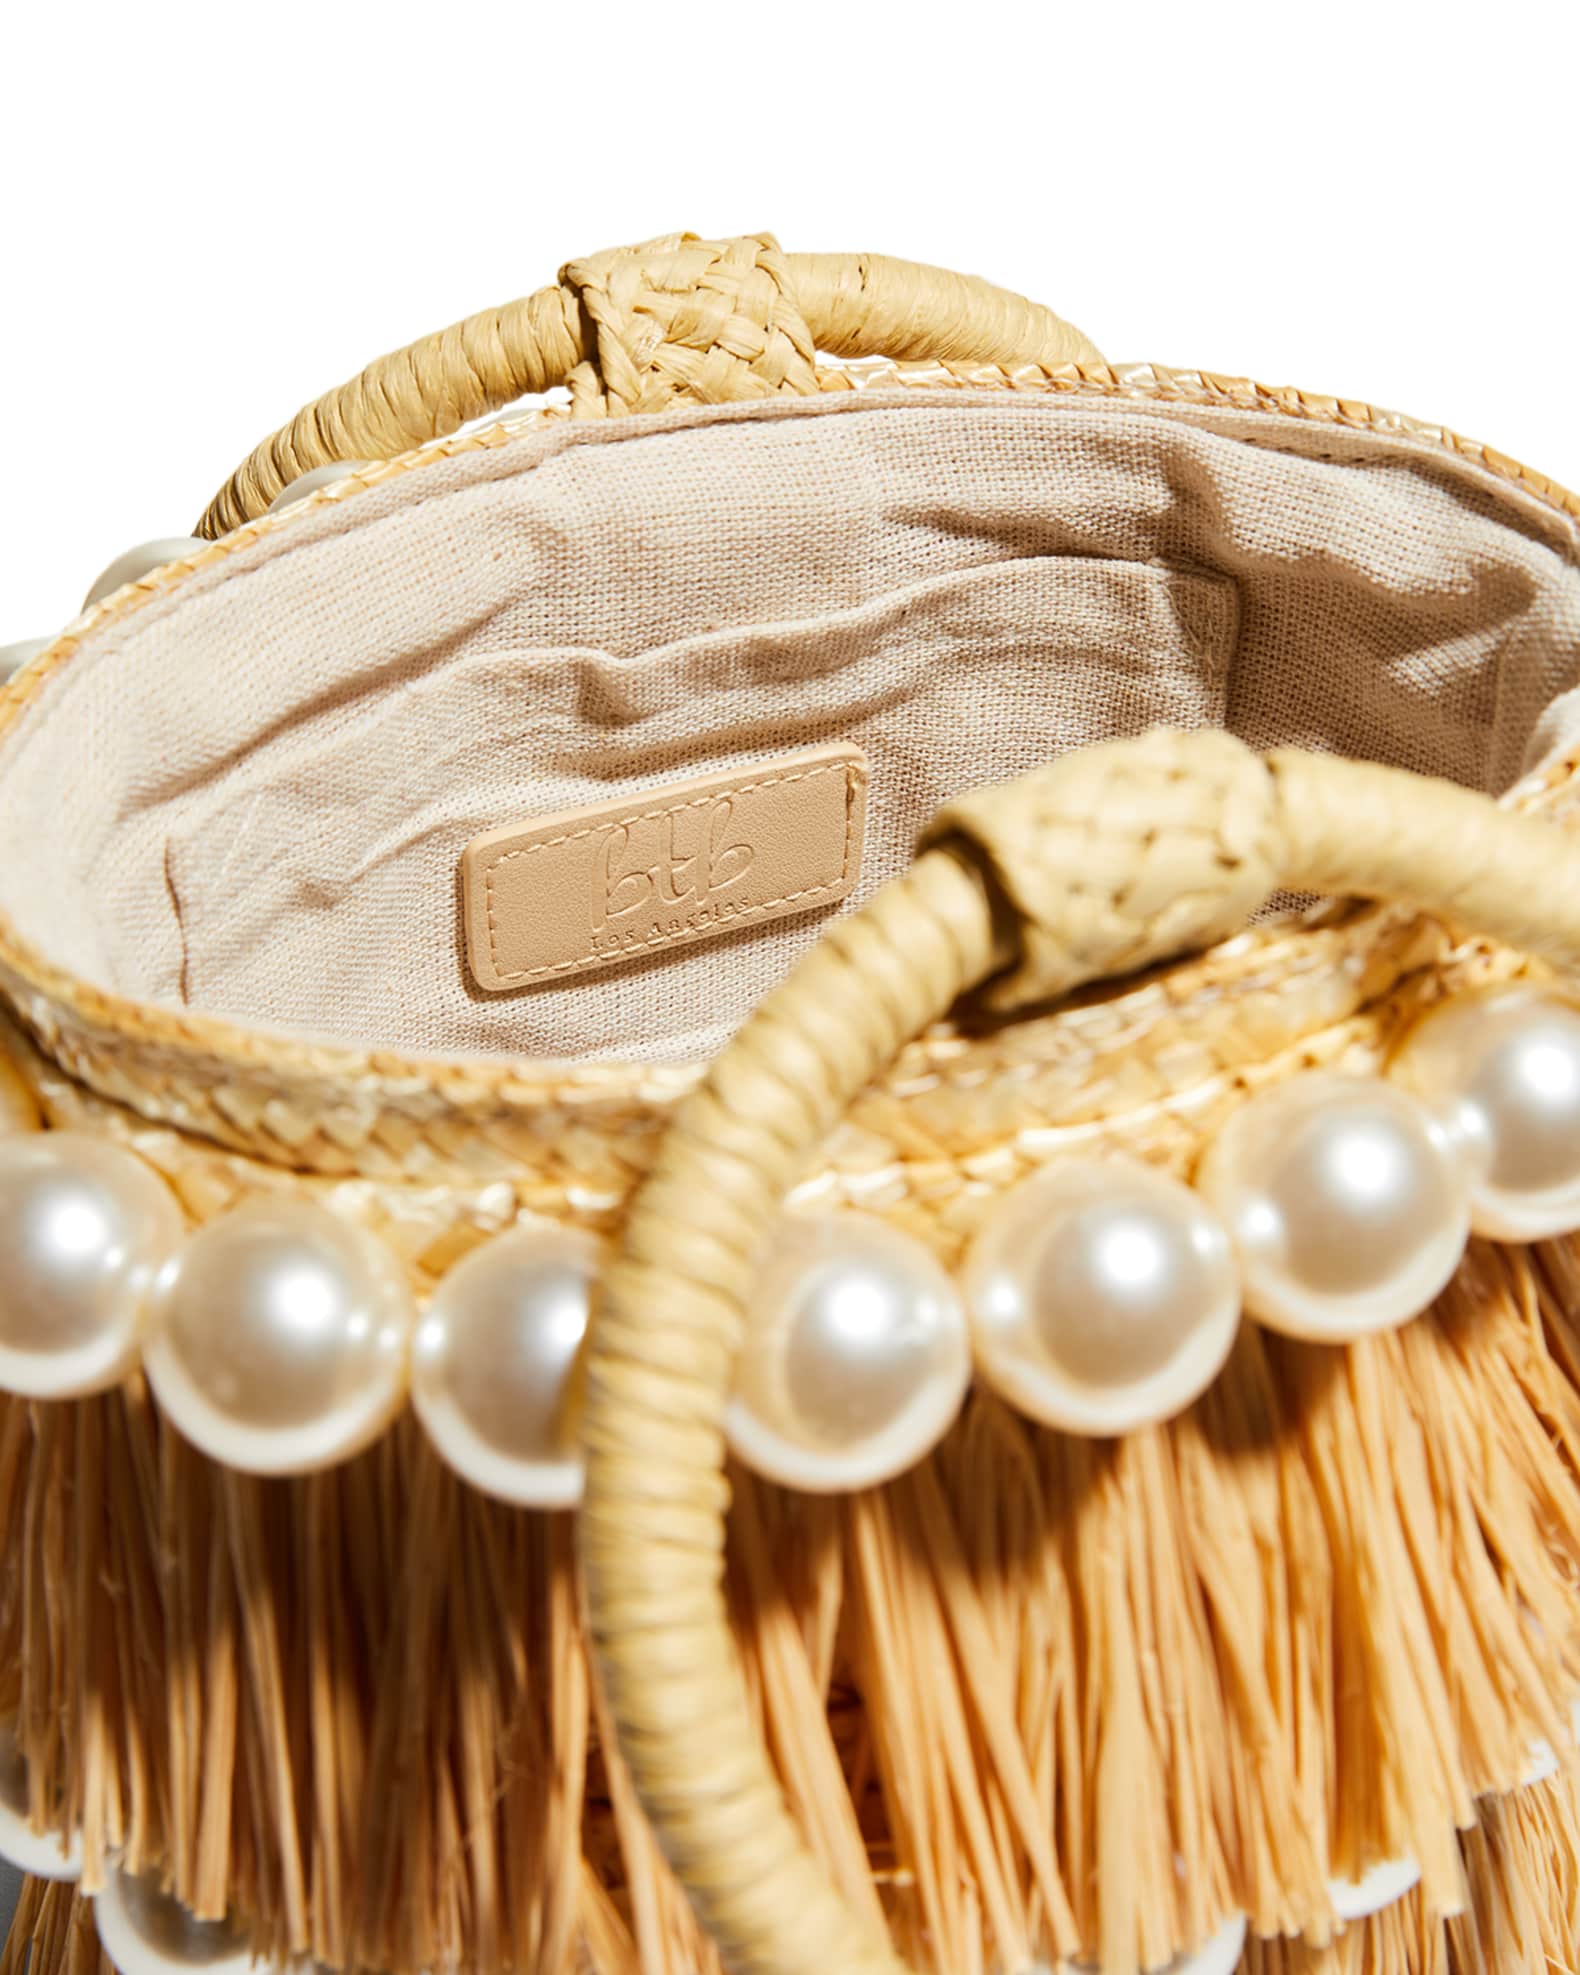 Clare V. Pearl Accent Straw Bucket Bag - Neutrals Bucket Bags